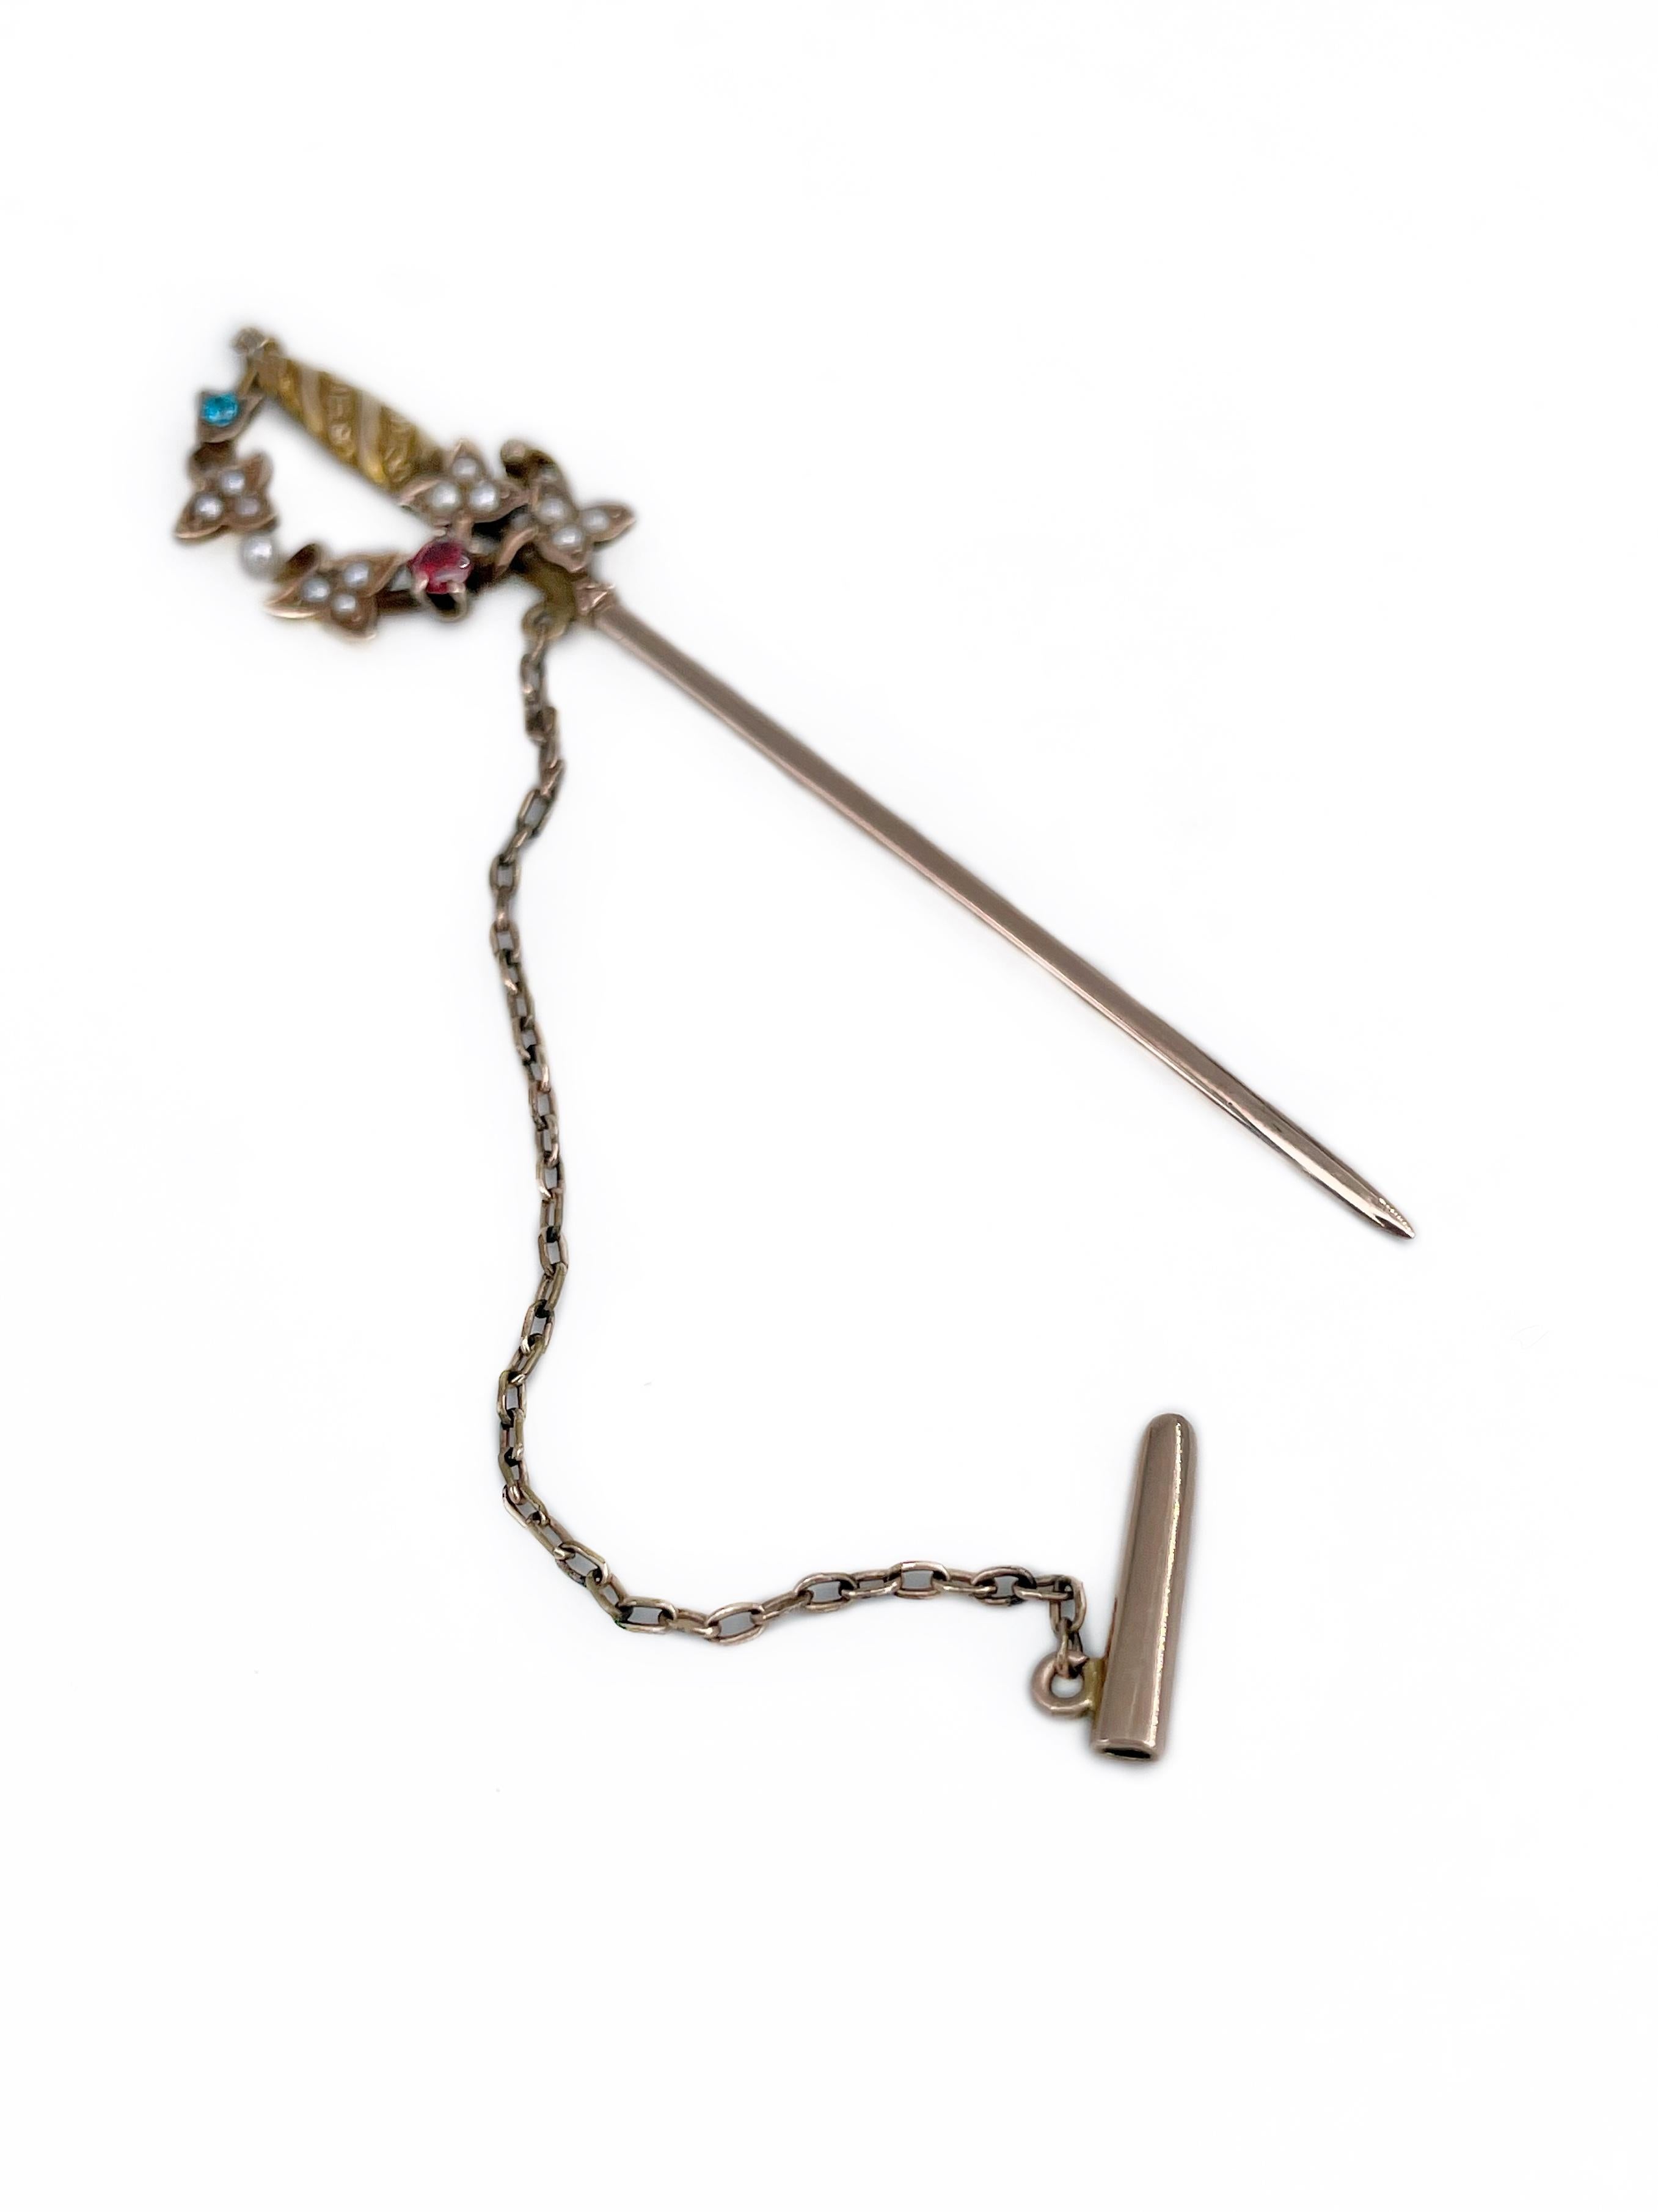 This is an Edwardian bejeweled jabot sword stick pin brooch. It is crafted in 9K yellow gold. Circa 1910. The piece features seed pearls. 

Chain is made of base metal. 

Weight: 3.89g
Length: 8cm

———

If you have any questions, please feel free to